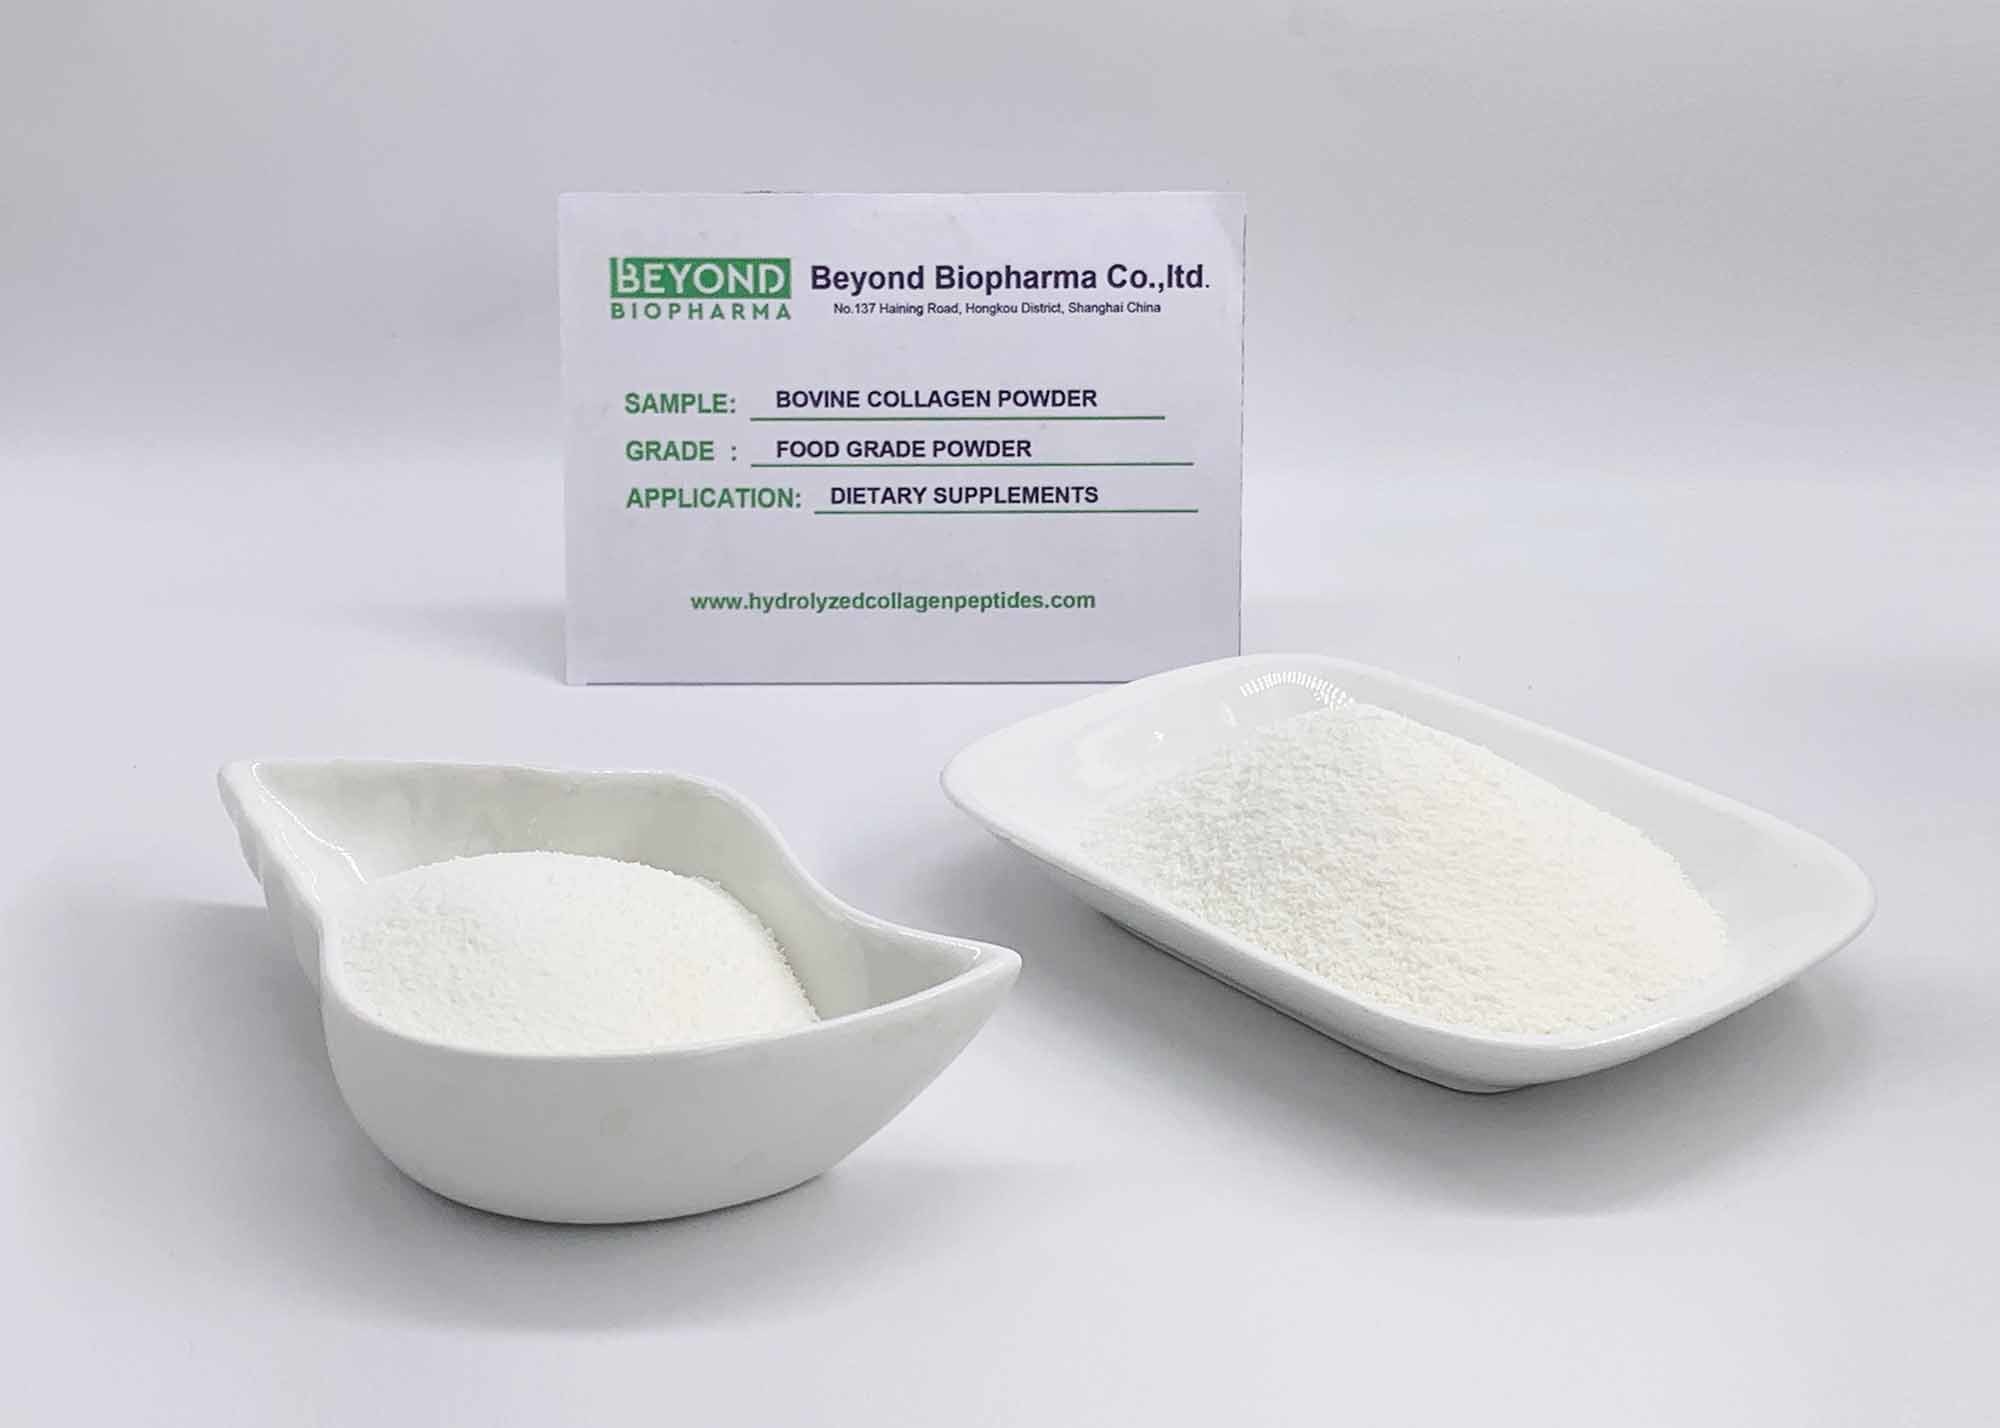 Hydrolyzed Collagen Peptides and Powder from Bovine Hides